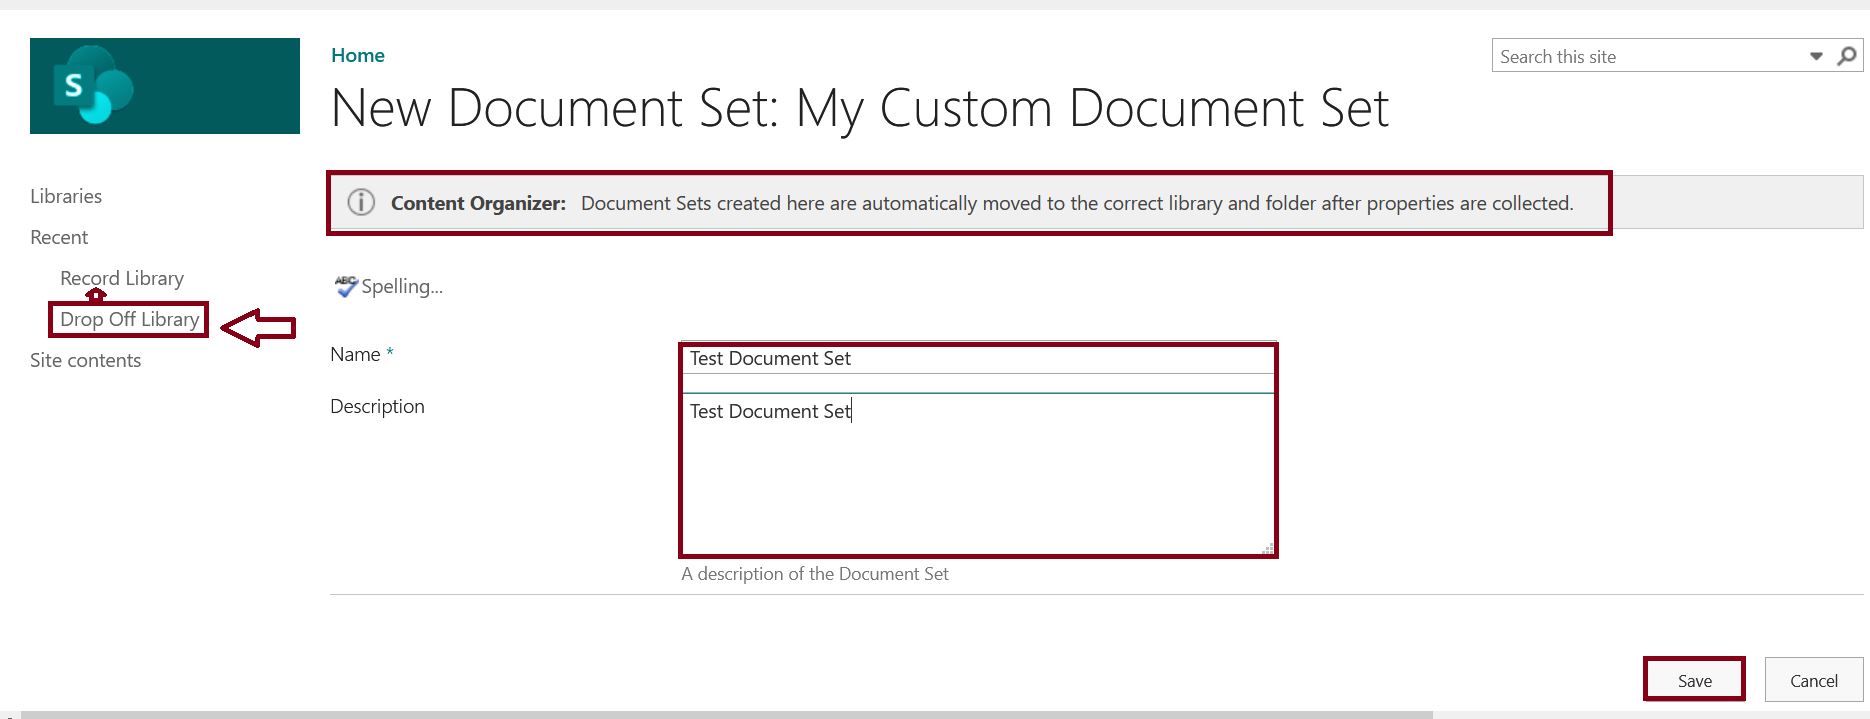 Record center in SharePoint Online - Content Organizer - Document Sets created here are automatically moved to the correct library and folder after properties are collected.